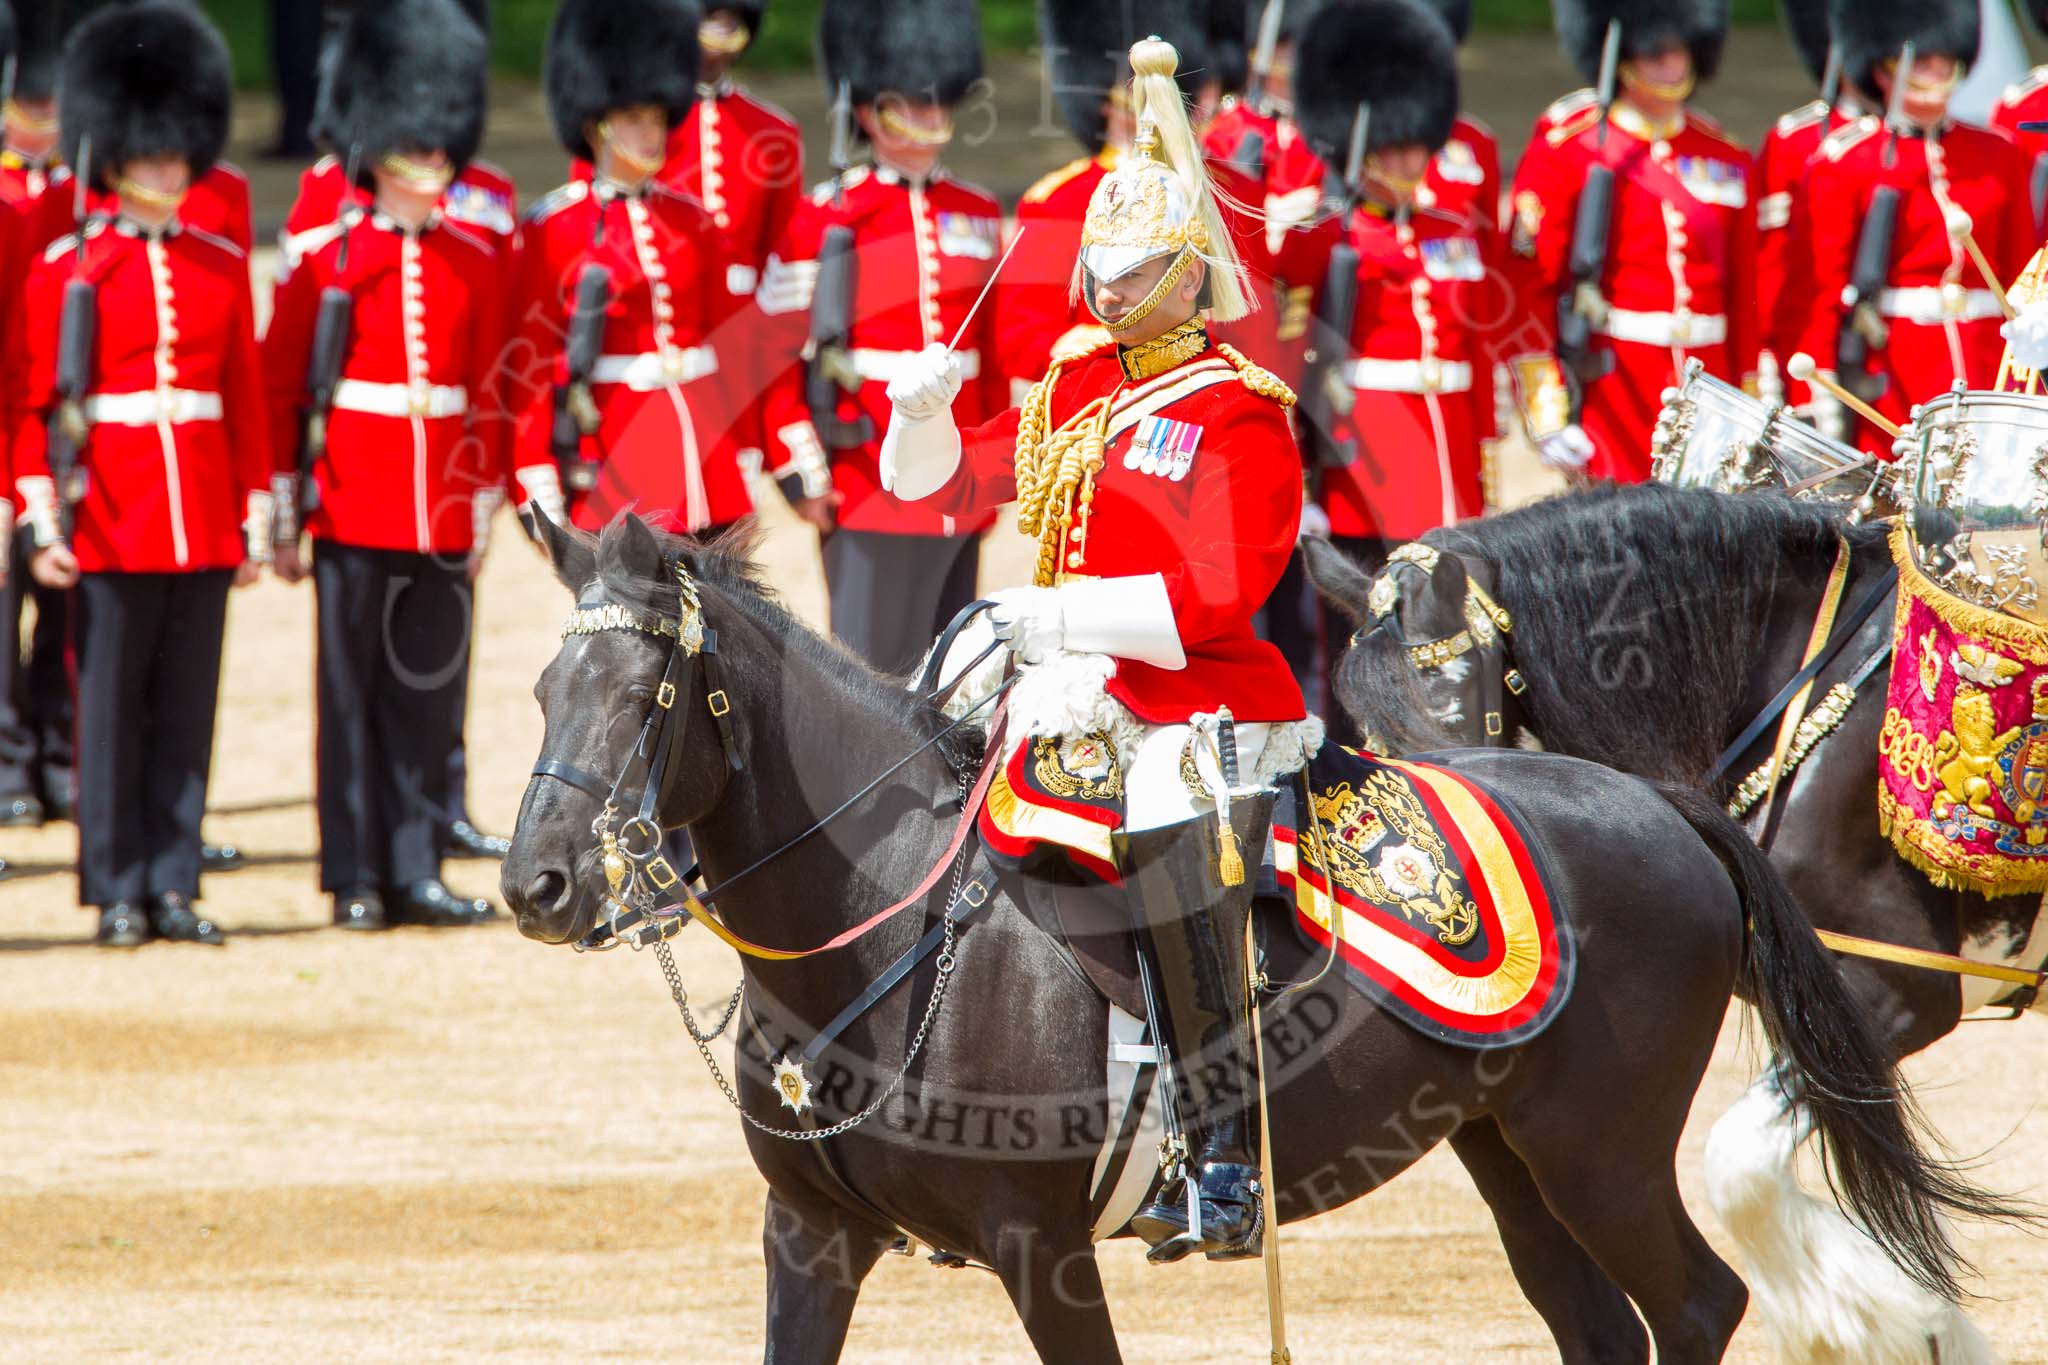 Trooping the Colour 2013: The Director of Music of the Household Cavalry, Major Paul Wilman, The Life Guards, during the Mounted Troops Ride Past. Image #651, 15 June 2013 11:52 Horse Guards Parade, London, UK